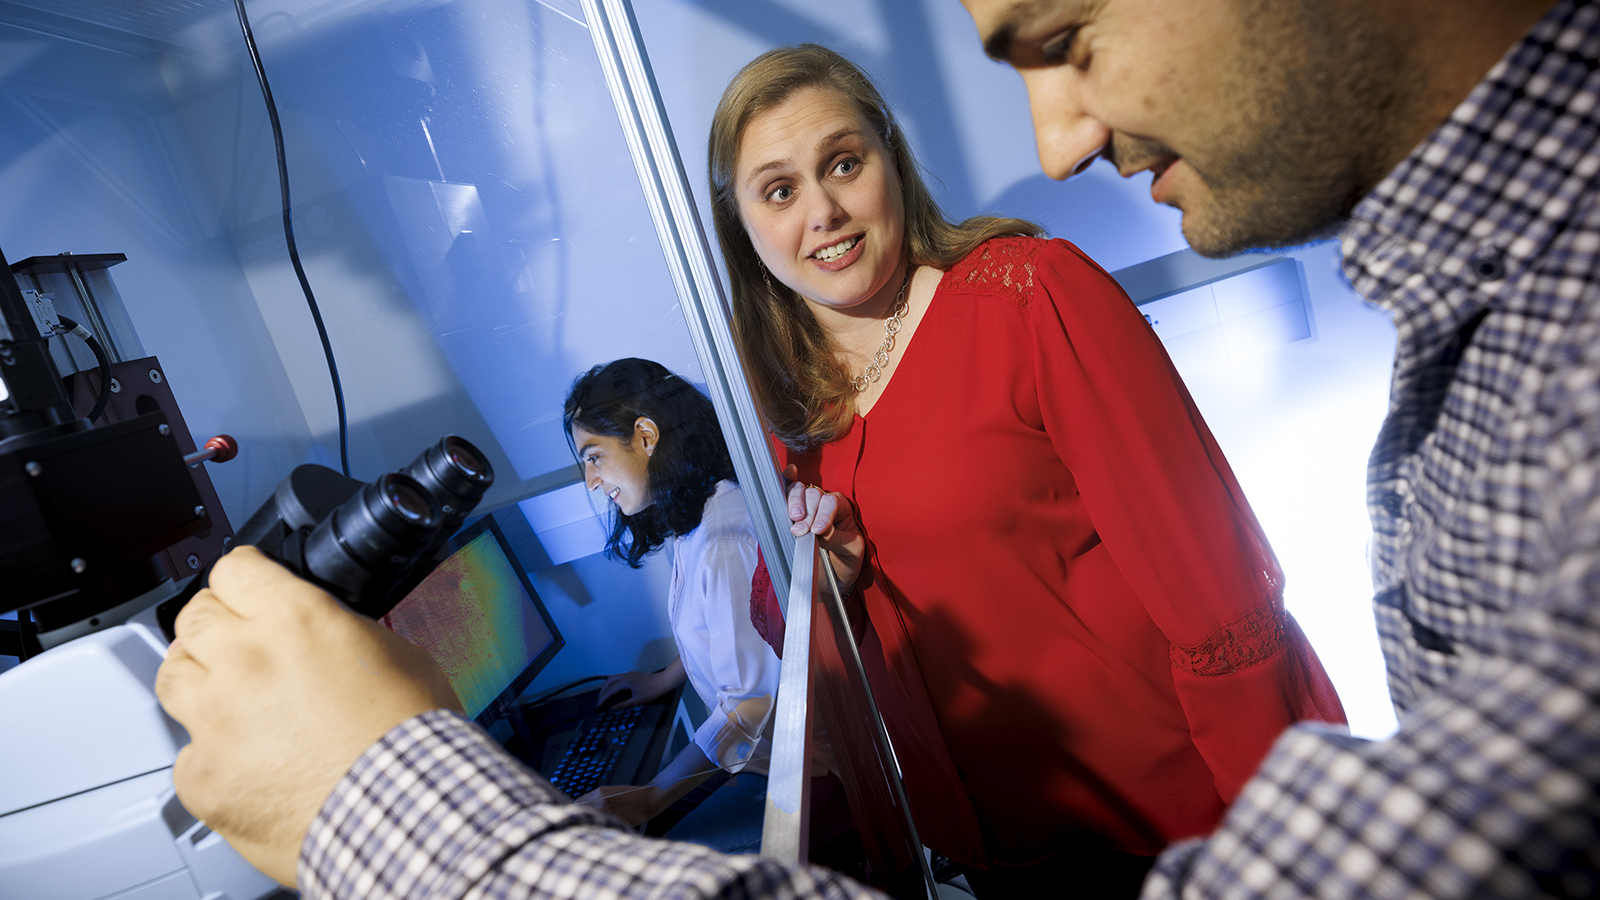 Nicole Iverson, assistant professor of biological systems engineering, has received a five-year, $550,000 NSF Faculty Early Career Development Program grant to develop ways to use carbon nanotubes as sensors that can help in the diagnosis and treatment of